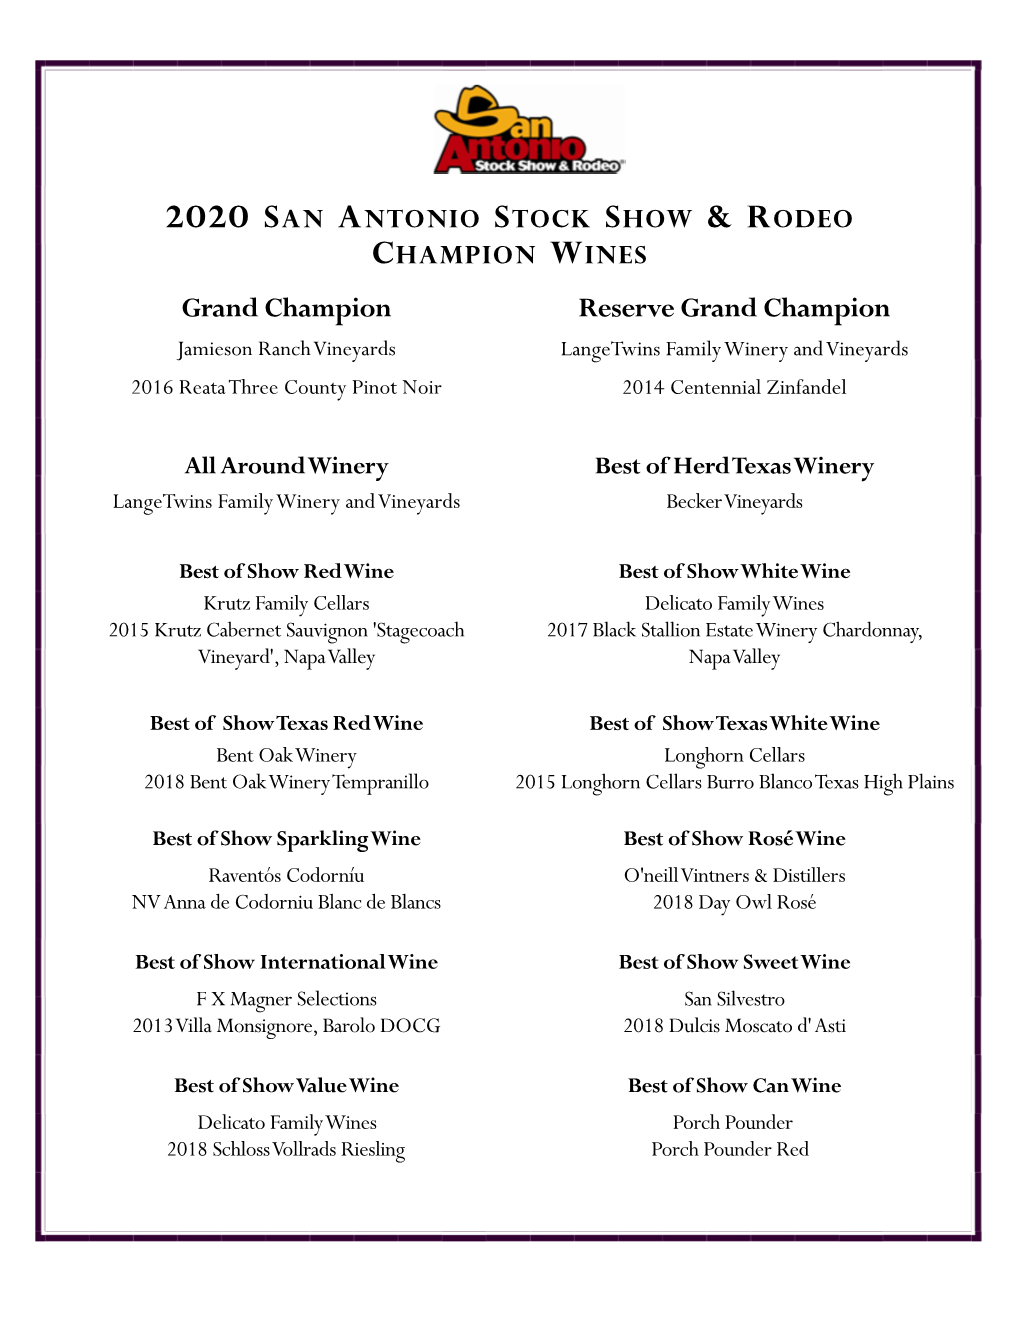 2020 SA Wine & Rodeo Wine Competition Medal Winners